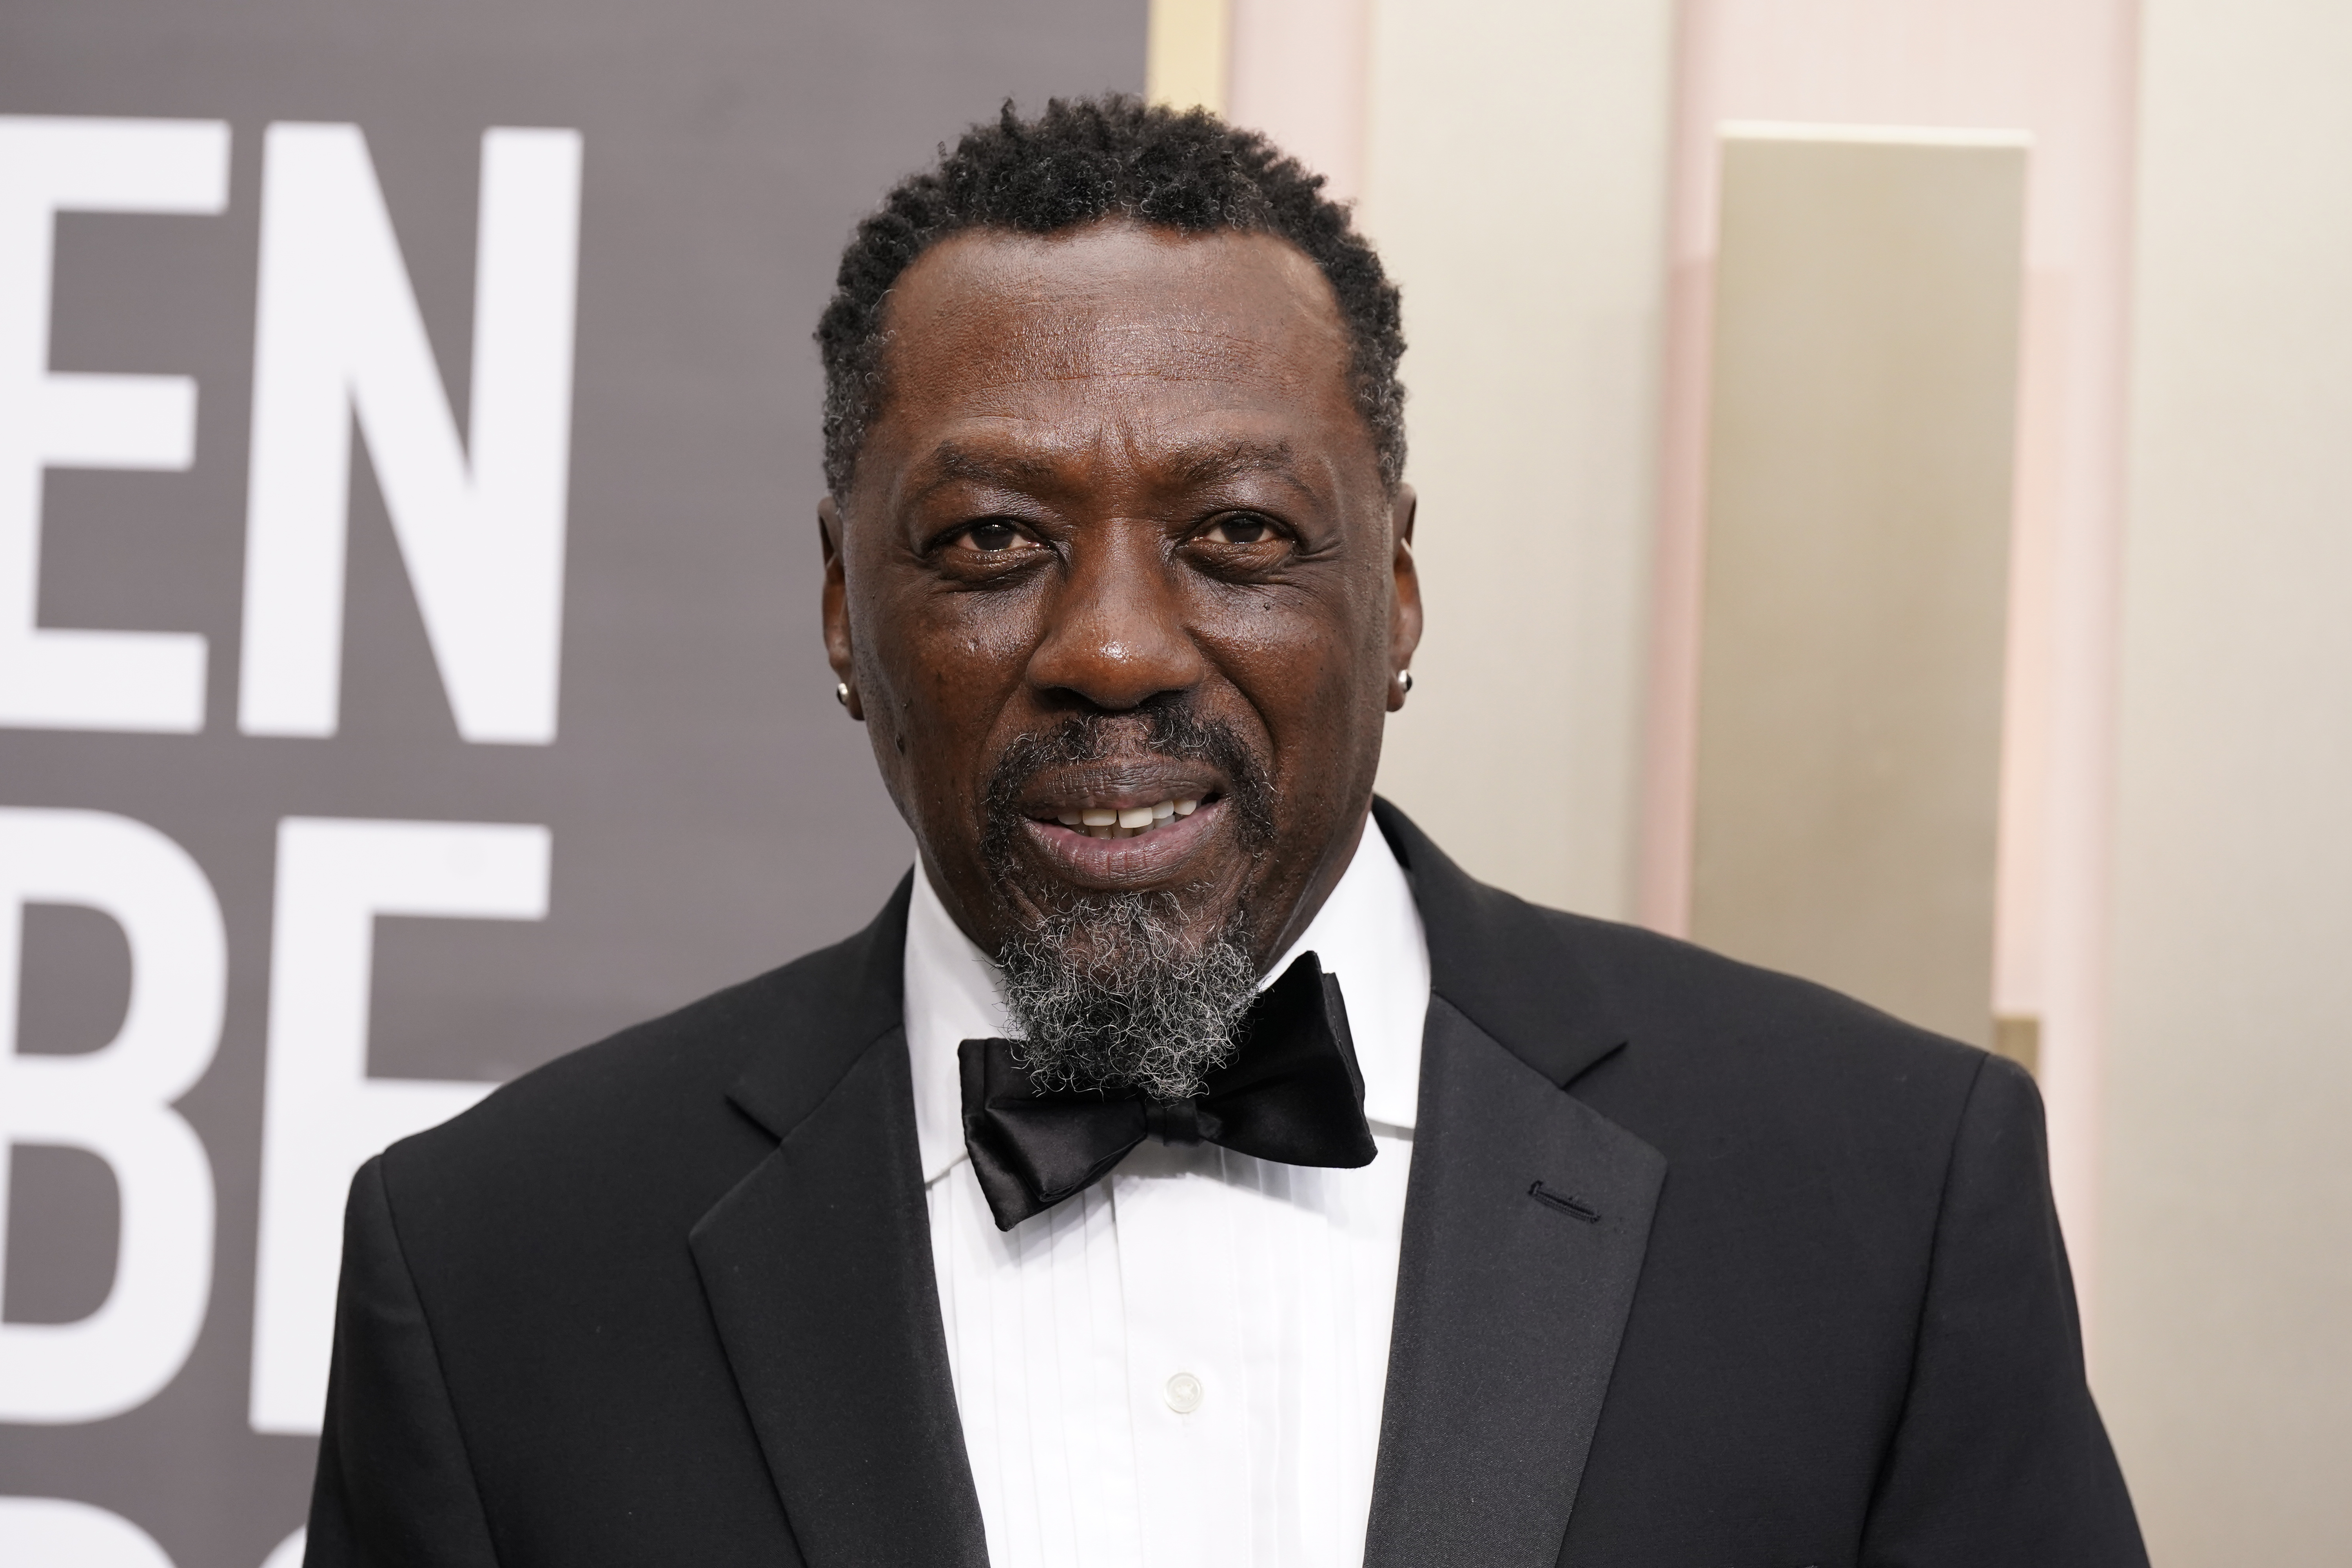 Edwin Lee Gibson arrives at the 80th annual Golden Globe Awards at the Beverly Hilton Hotel on Tuesday, Jan. 10, 2023, in Beverly Hills, Calif. (Photo by Jordan Strauss/Invision/AP)